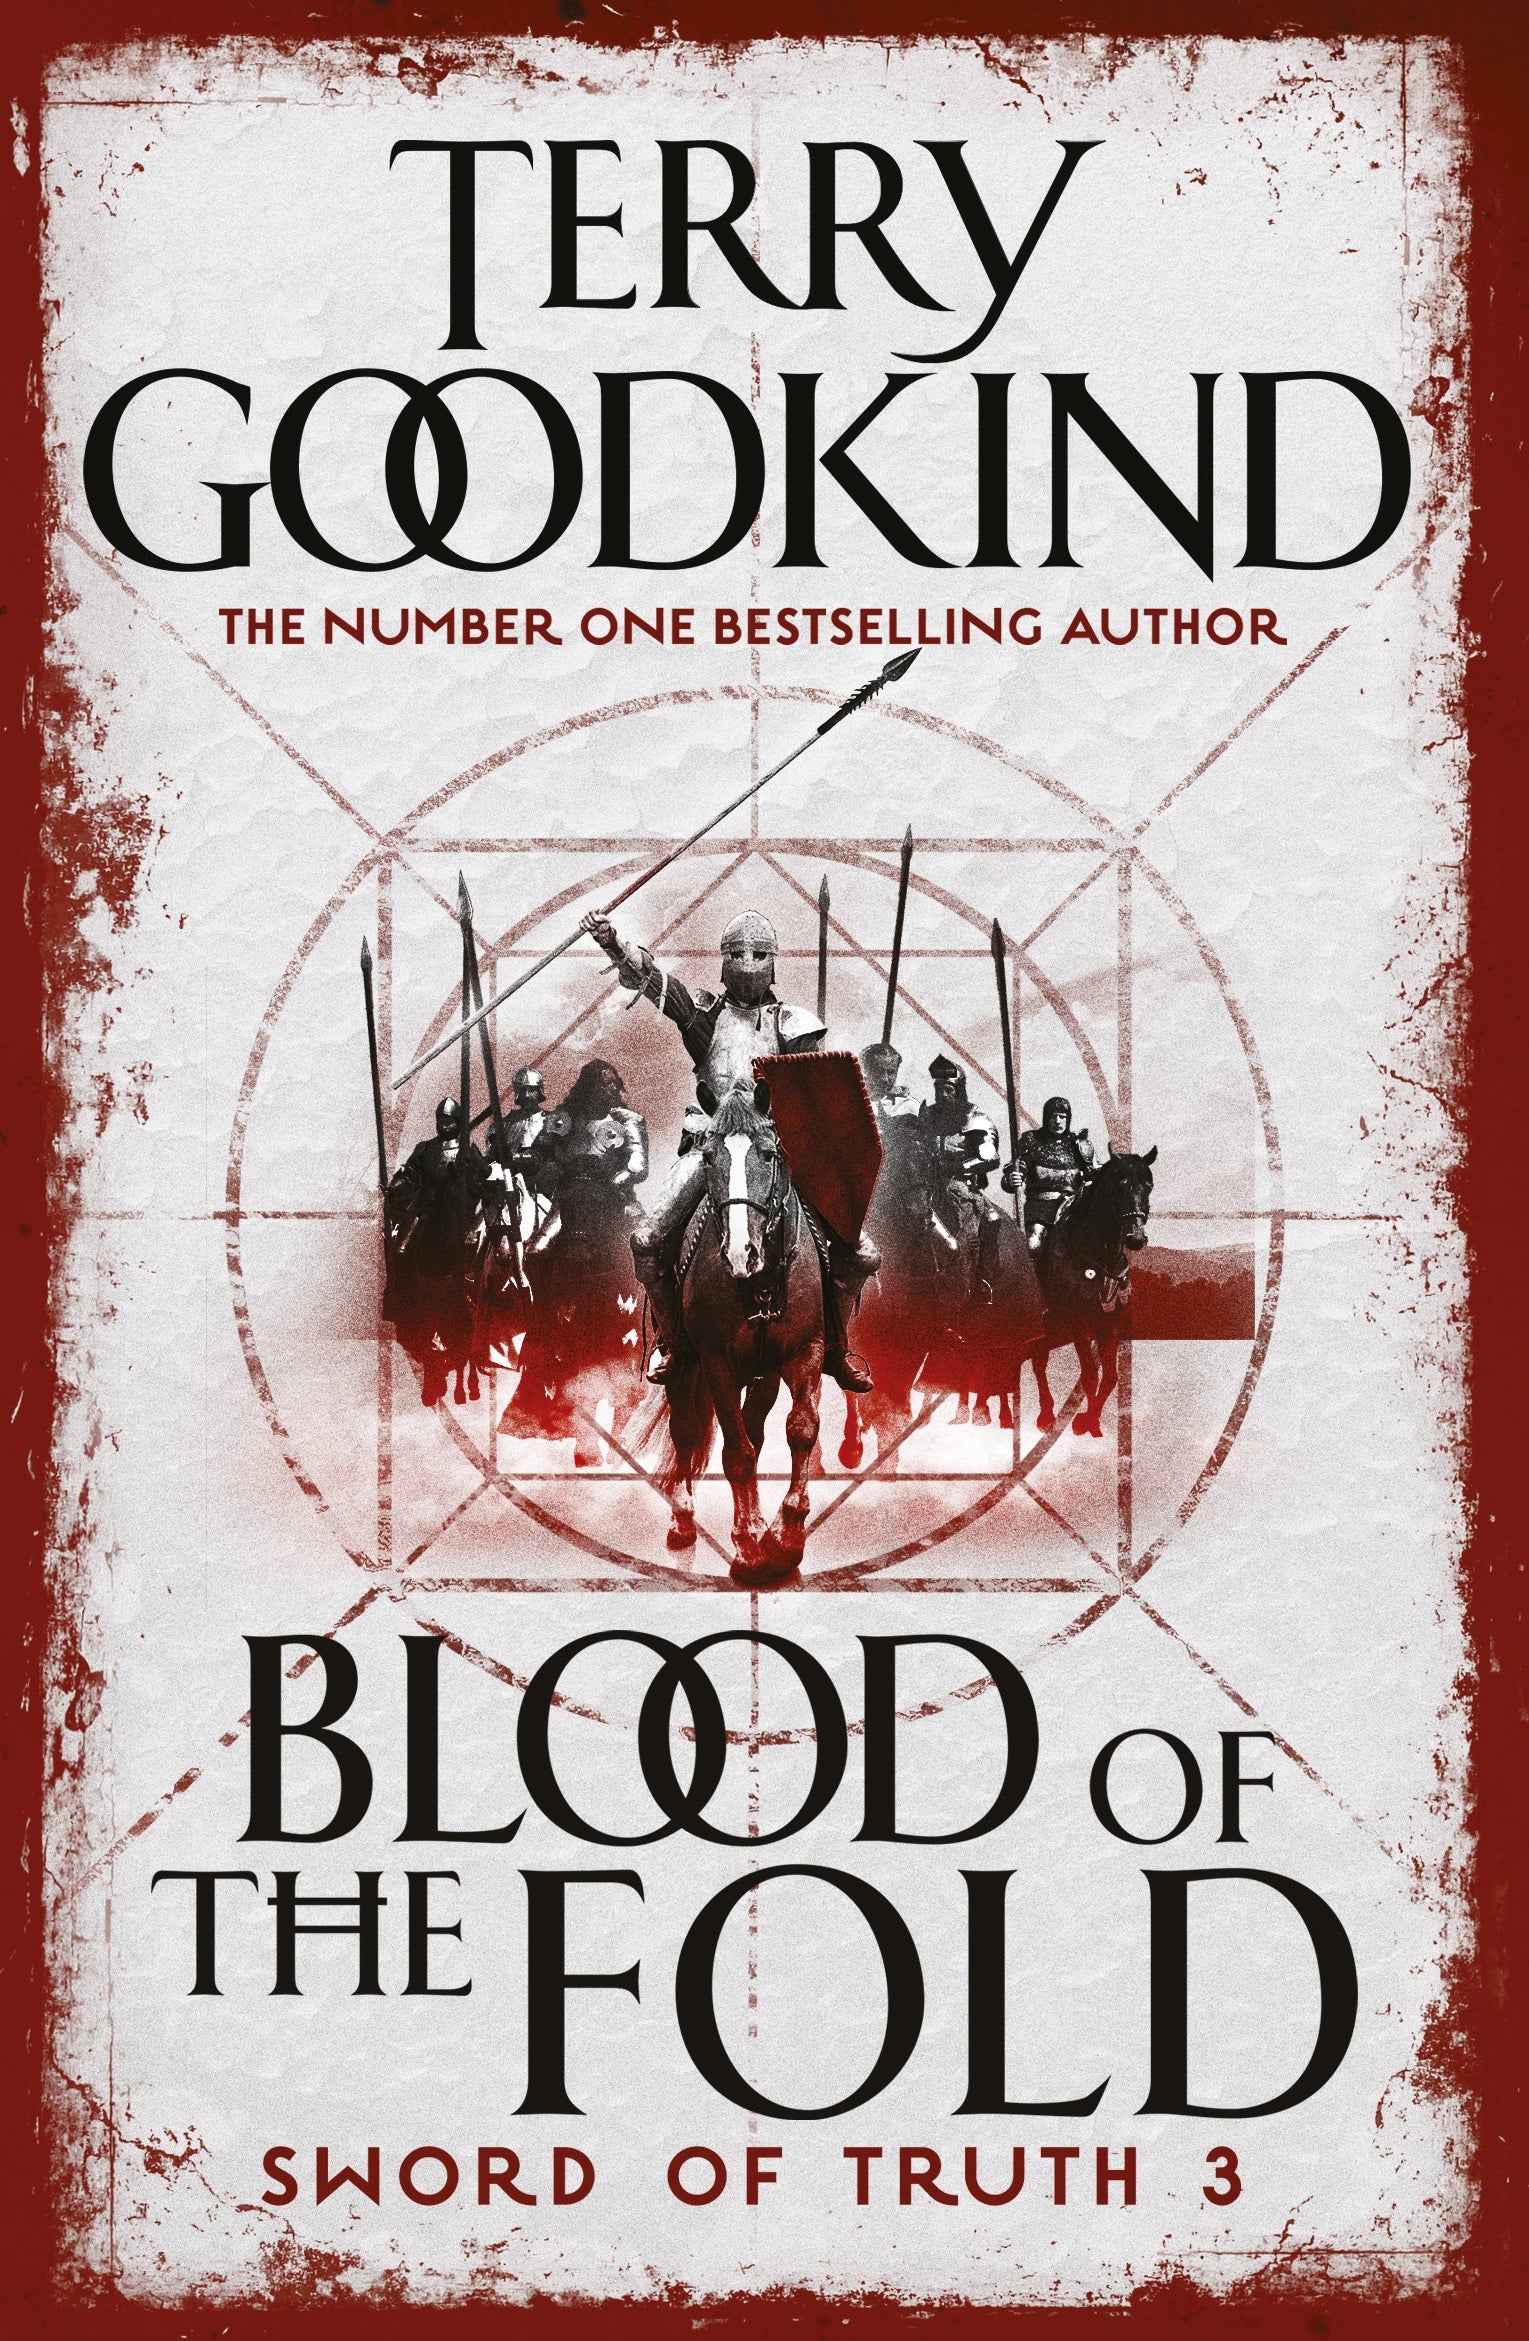 Blood of The Fold by Terry Goodkind